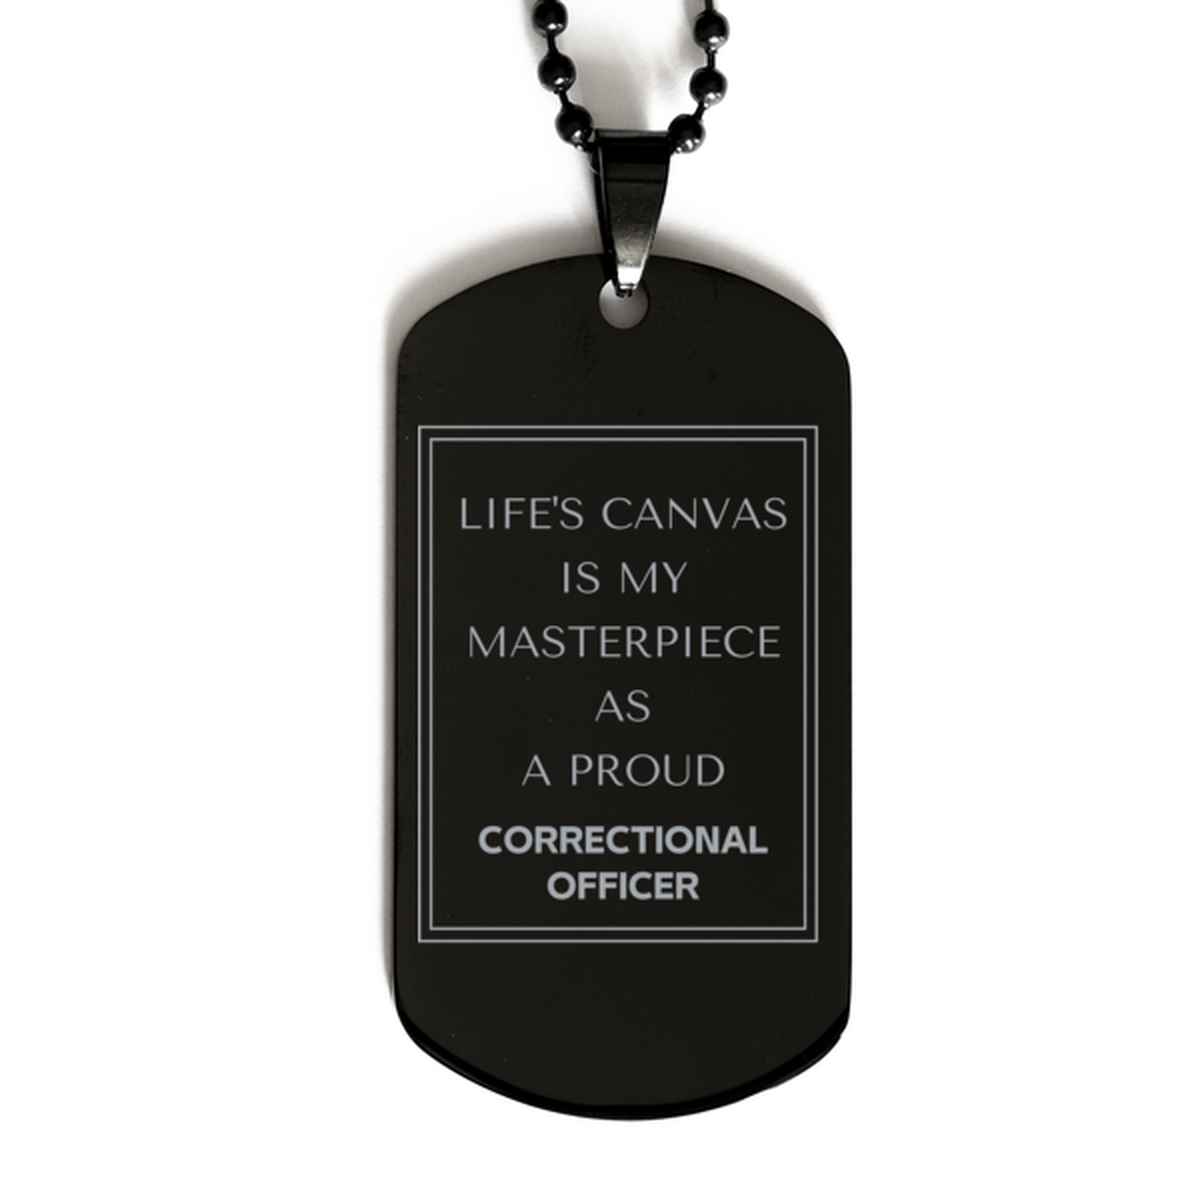 Proud Correctional Officer Gifts, Life's canvas is my masterpiece, Epic Birthday Christmas Unique Black Dog Tag For Correctional Officer, Coworkers, Men, Women, Friends